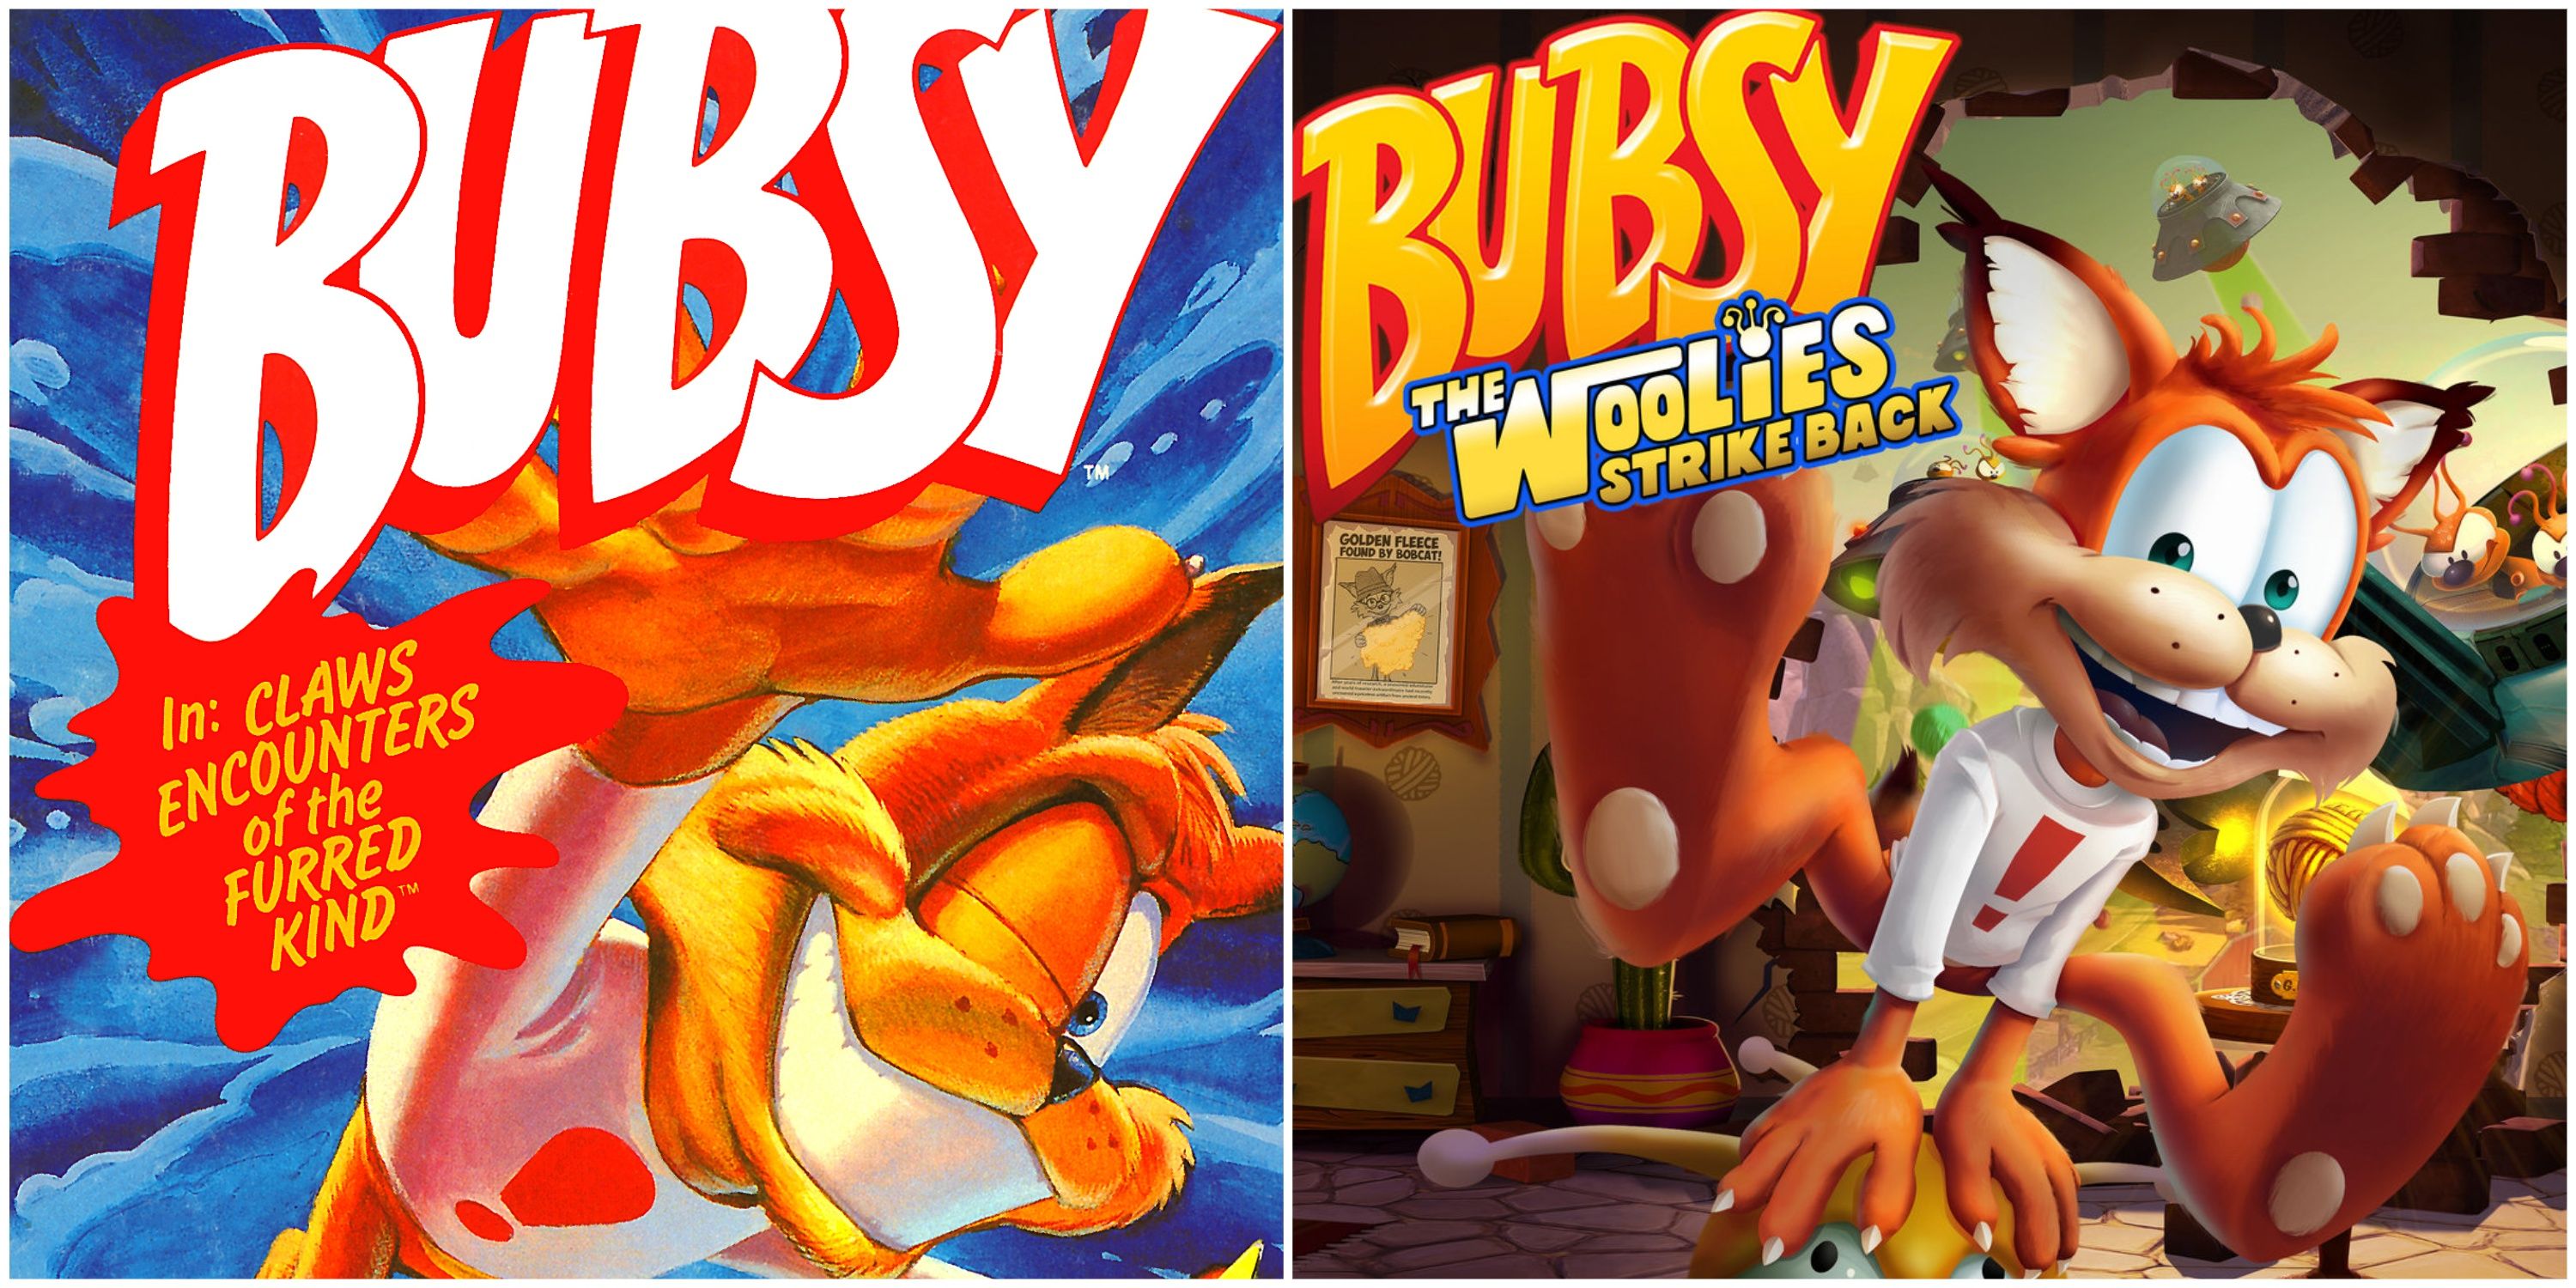 Bubsy in Claws Encounters of the Furred Kind and The Woolies Strike Back